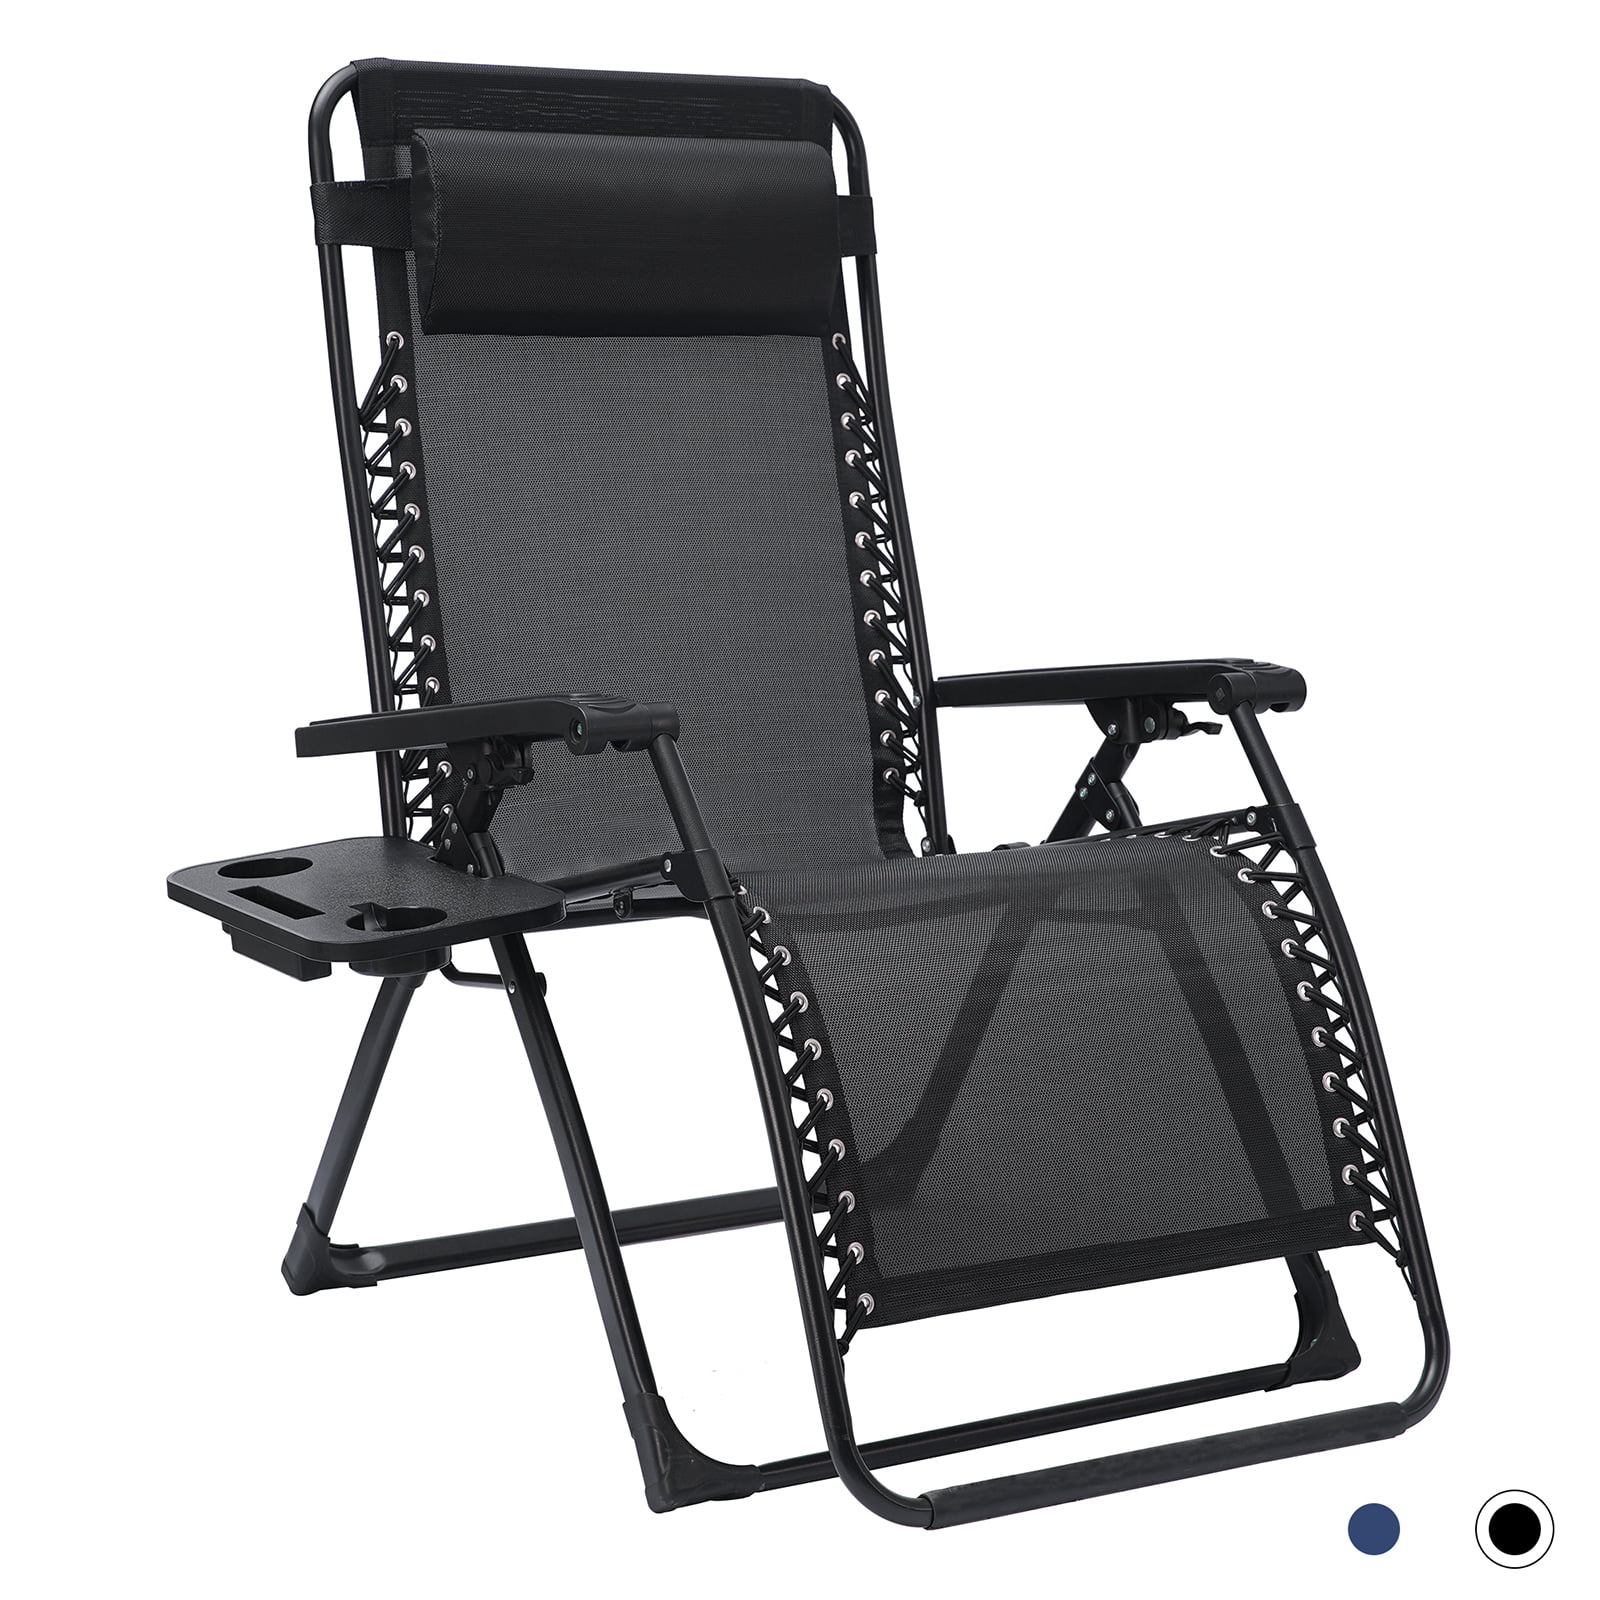 Details about   2 Piece Oversized Zero Gravity Recliner Lounger Outdoor Folding Patio Chairs 